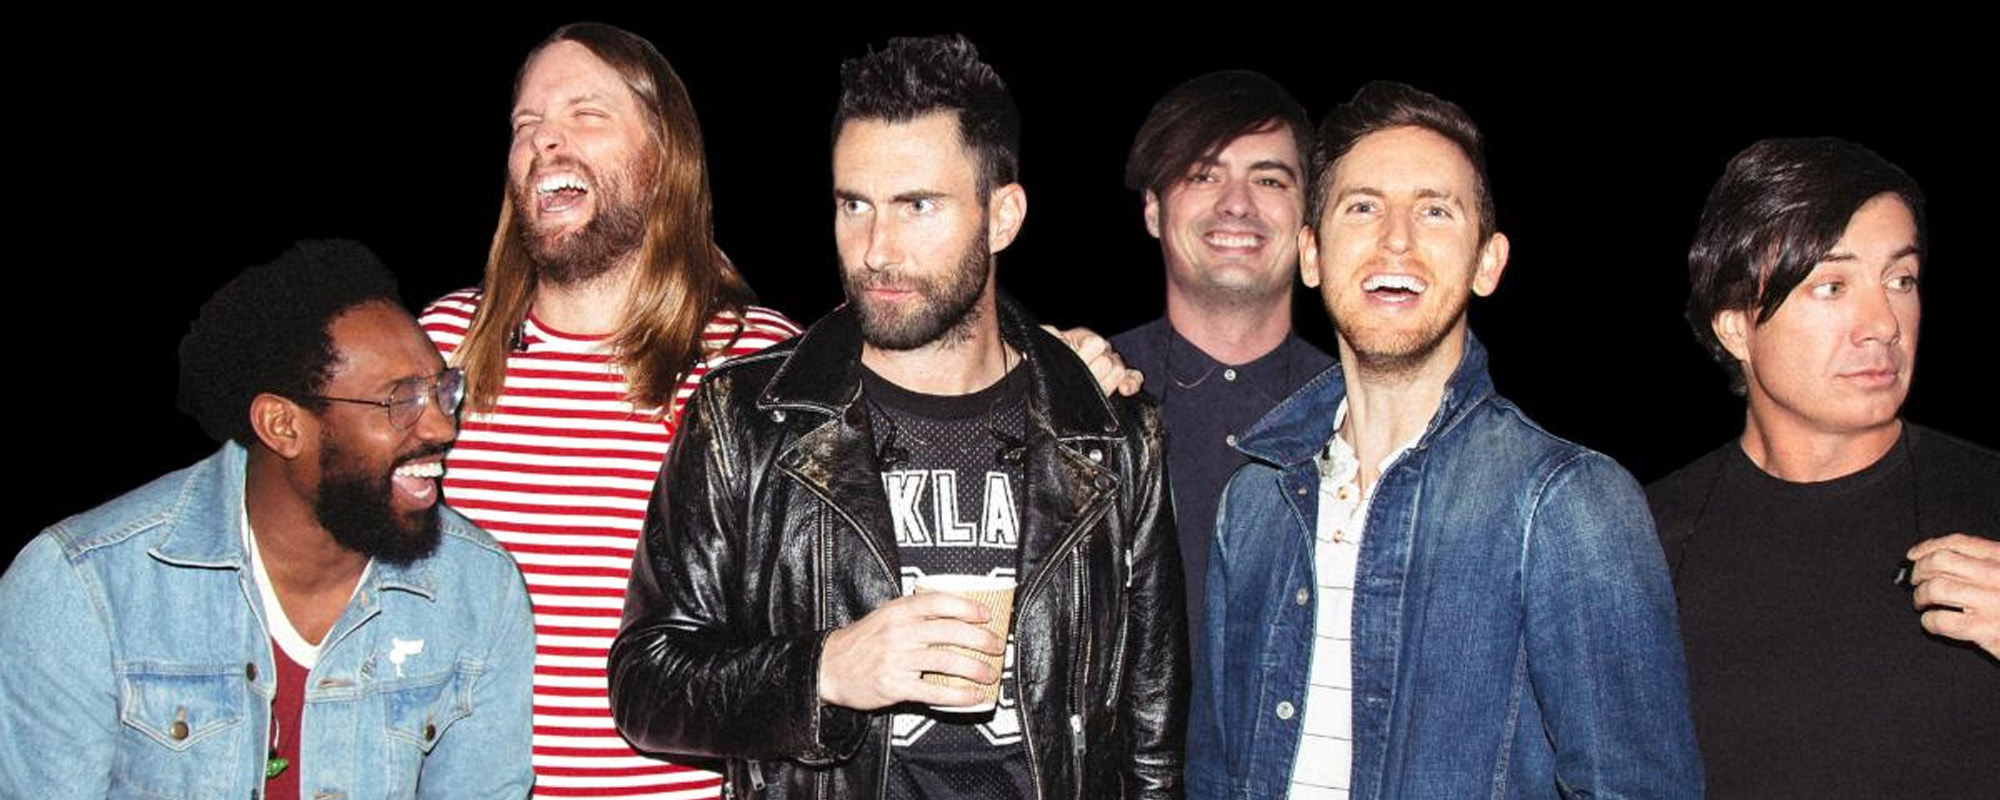 Maroon 5 Announces Special Guests and Track List for Upcoming Album ‘Jordi’